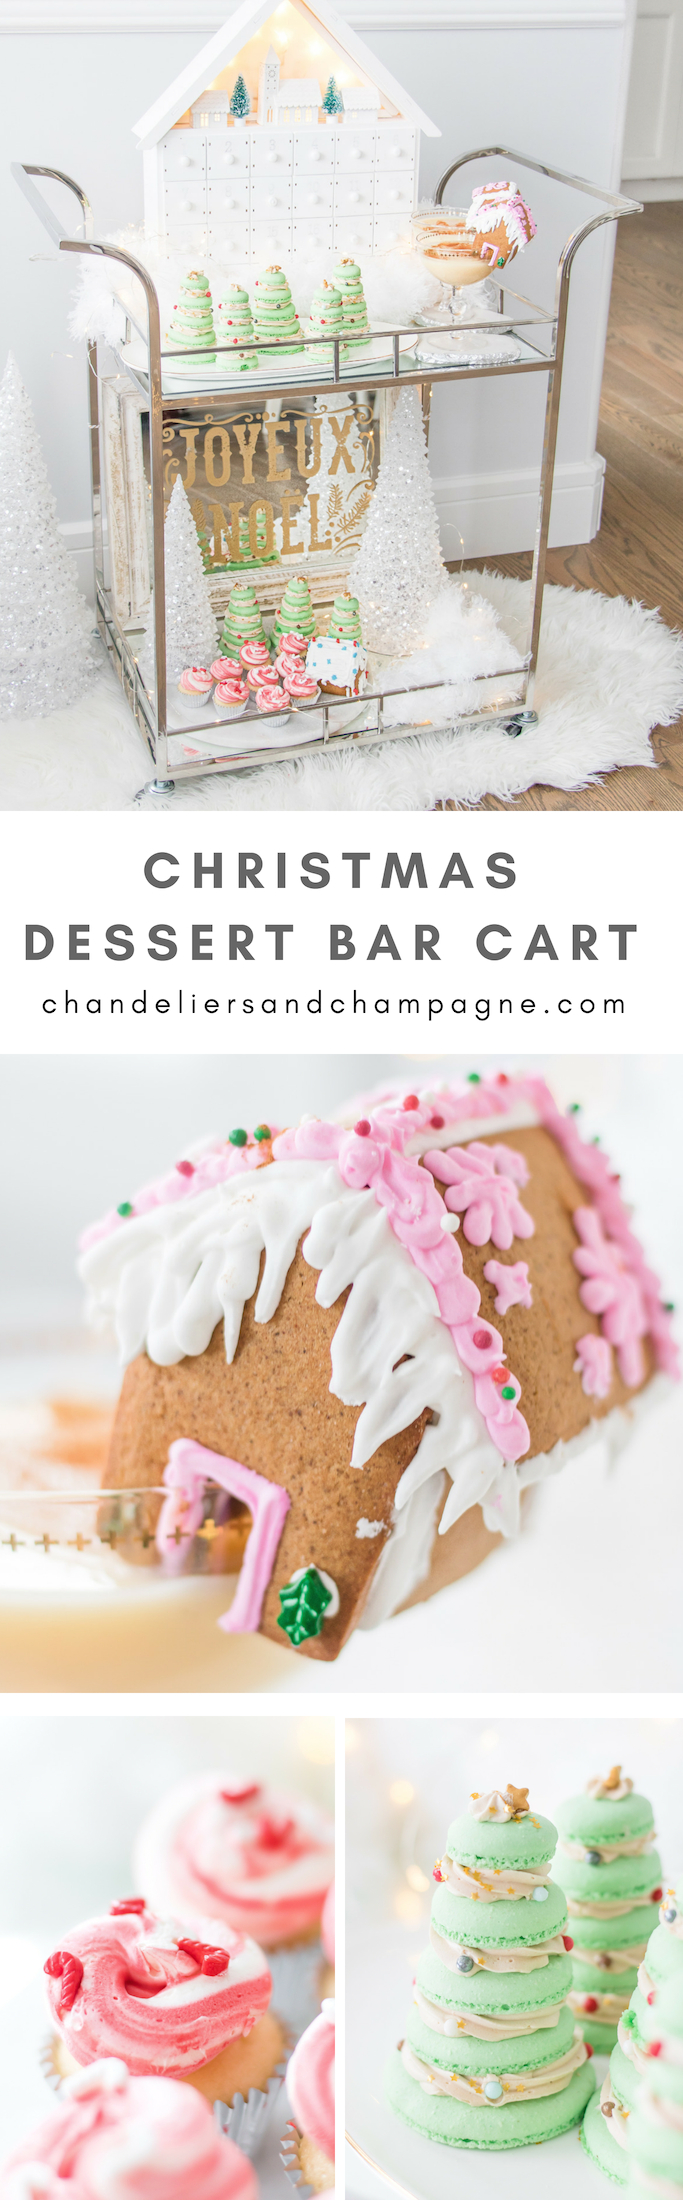 Christmas Dessert Bar Cart styling ideas with eggnog cocktails and gingerbread glass toppers, macaron Christmas trees, Christmas entertain bar cart styling for the holidays 